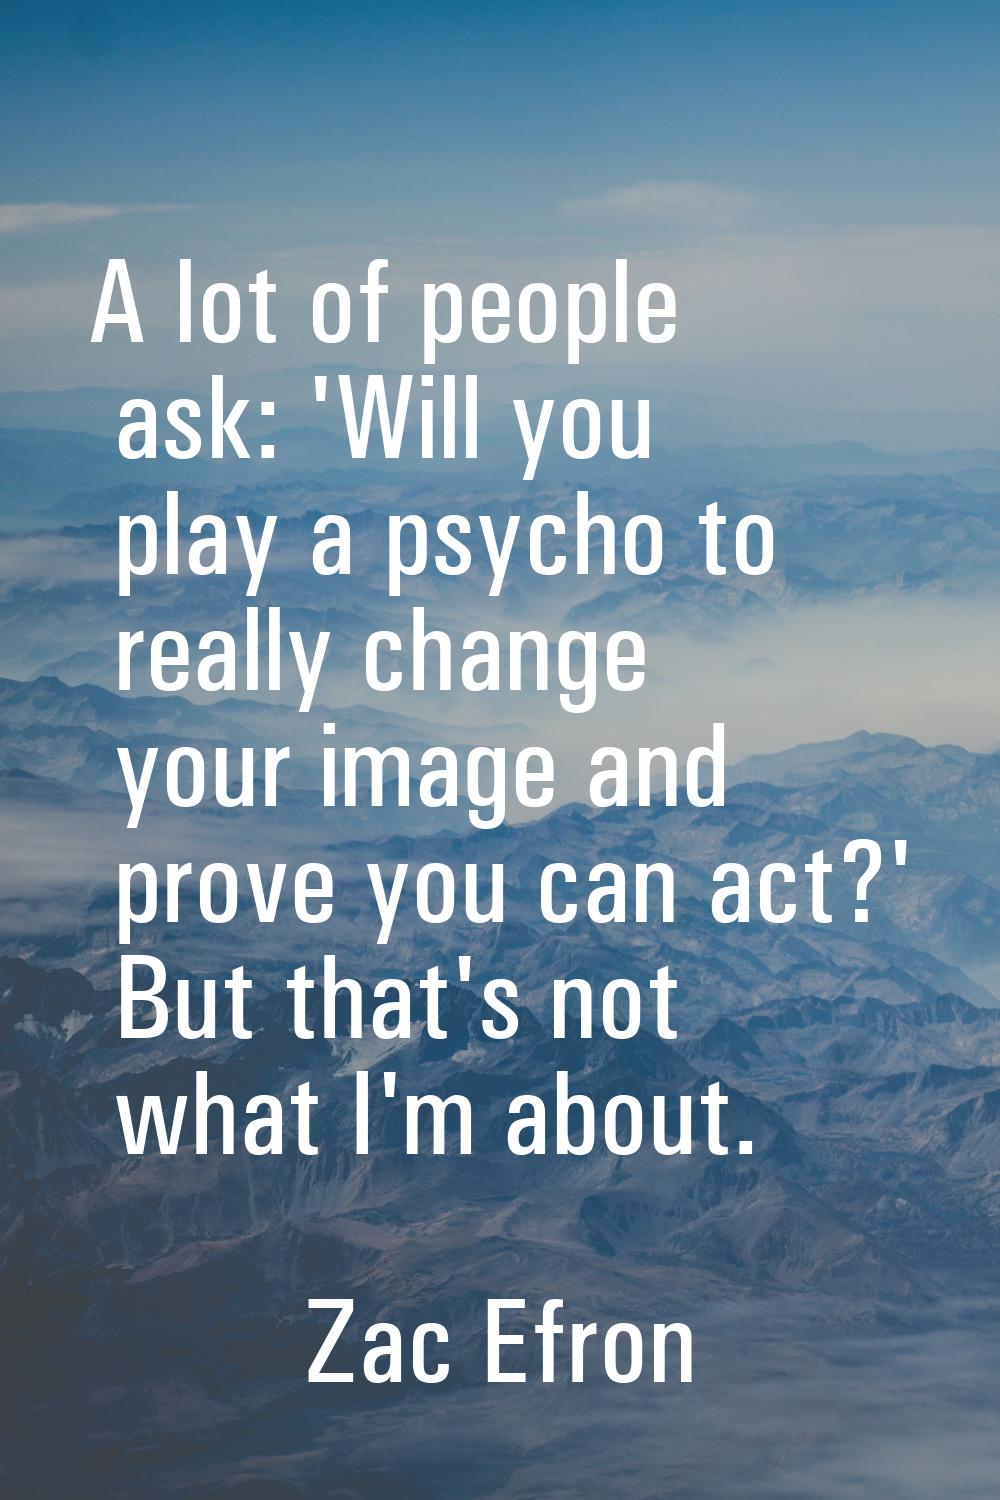 A lot of people ask: 'Will you play a psycho to really change your image and prove you can act?' Bu